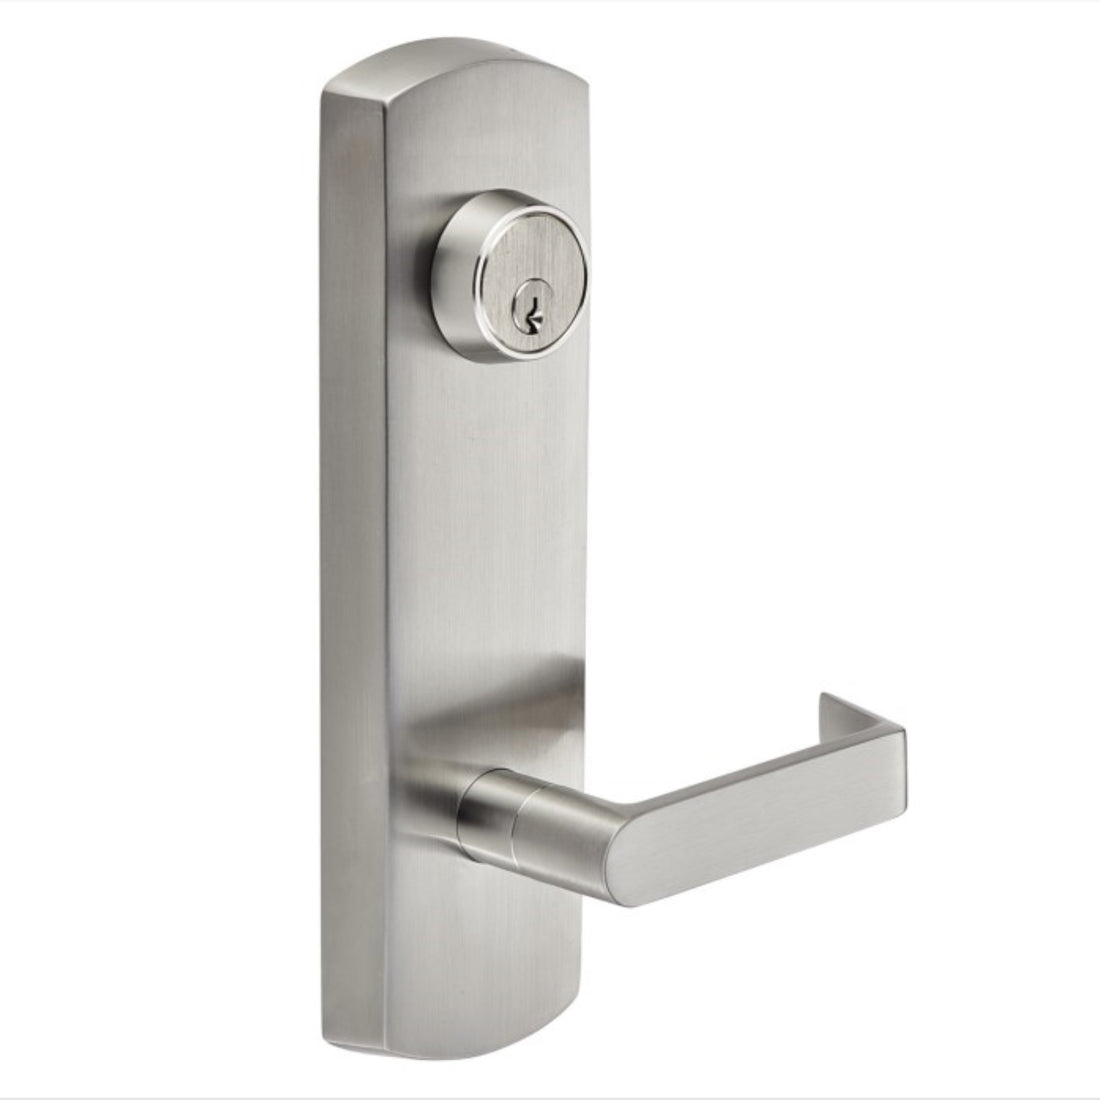 Brushed Chrome Commercial Entry Escutcheon Lever Trim for Panic Exit Device -  Pro-Edge HD